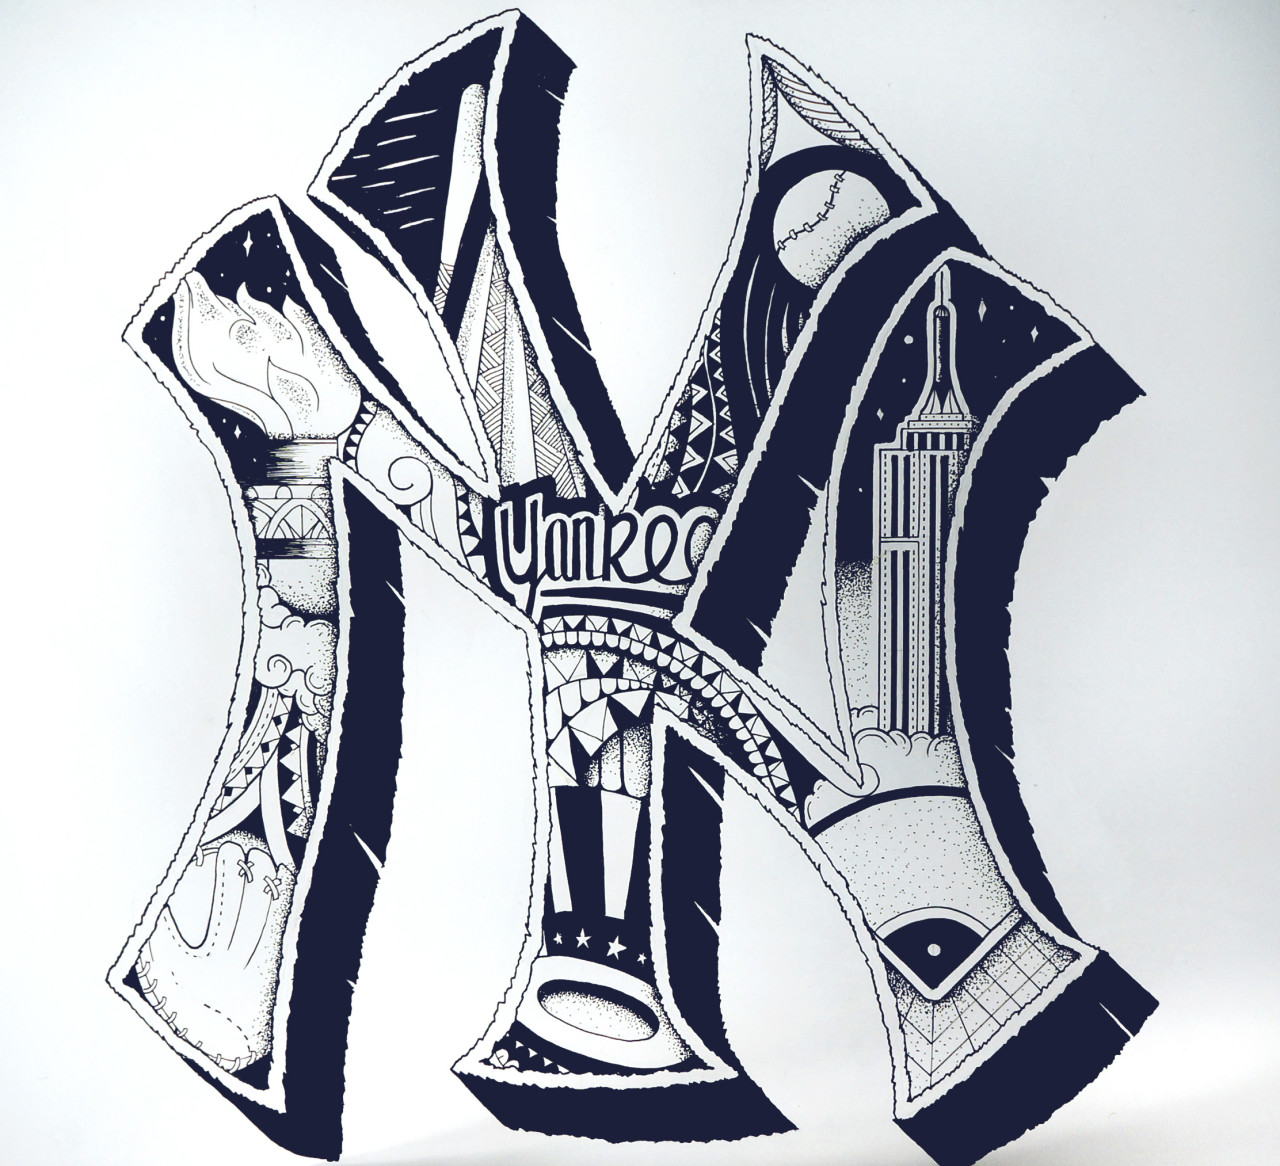 Sinners  Saints Tattoo Co  NY Yankees tattoo done by our apprentice  Nick Copeland  Facebook